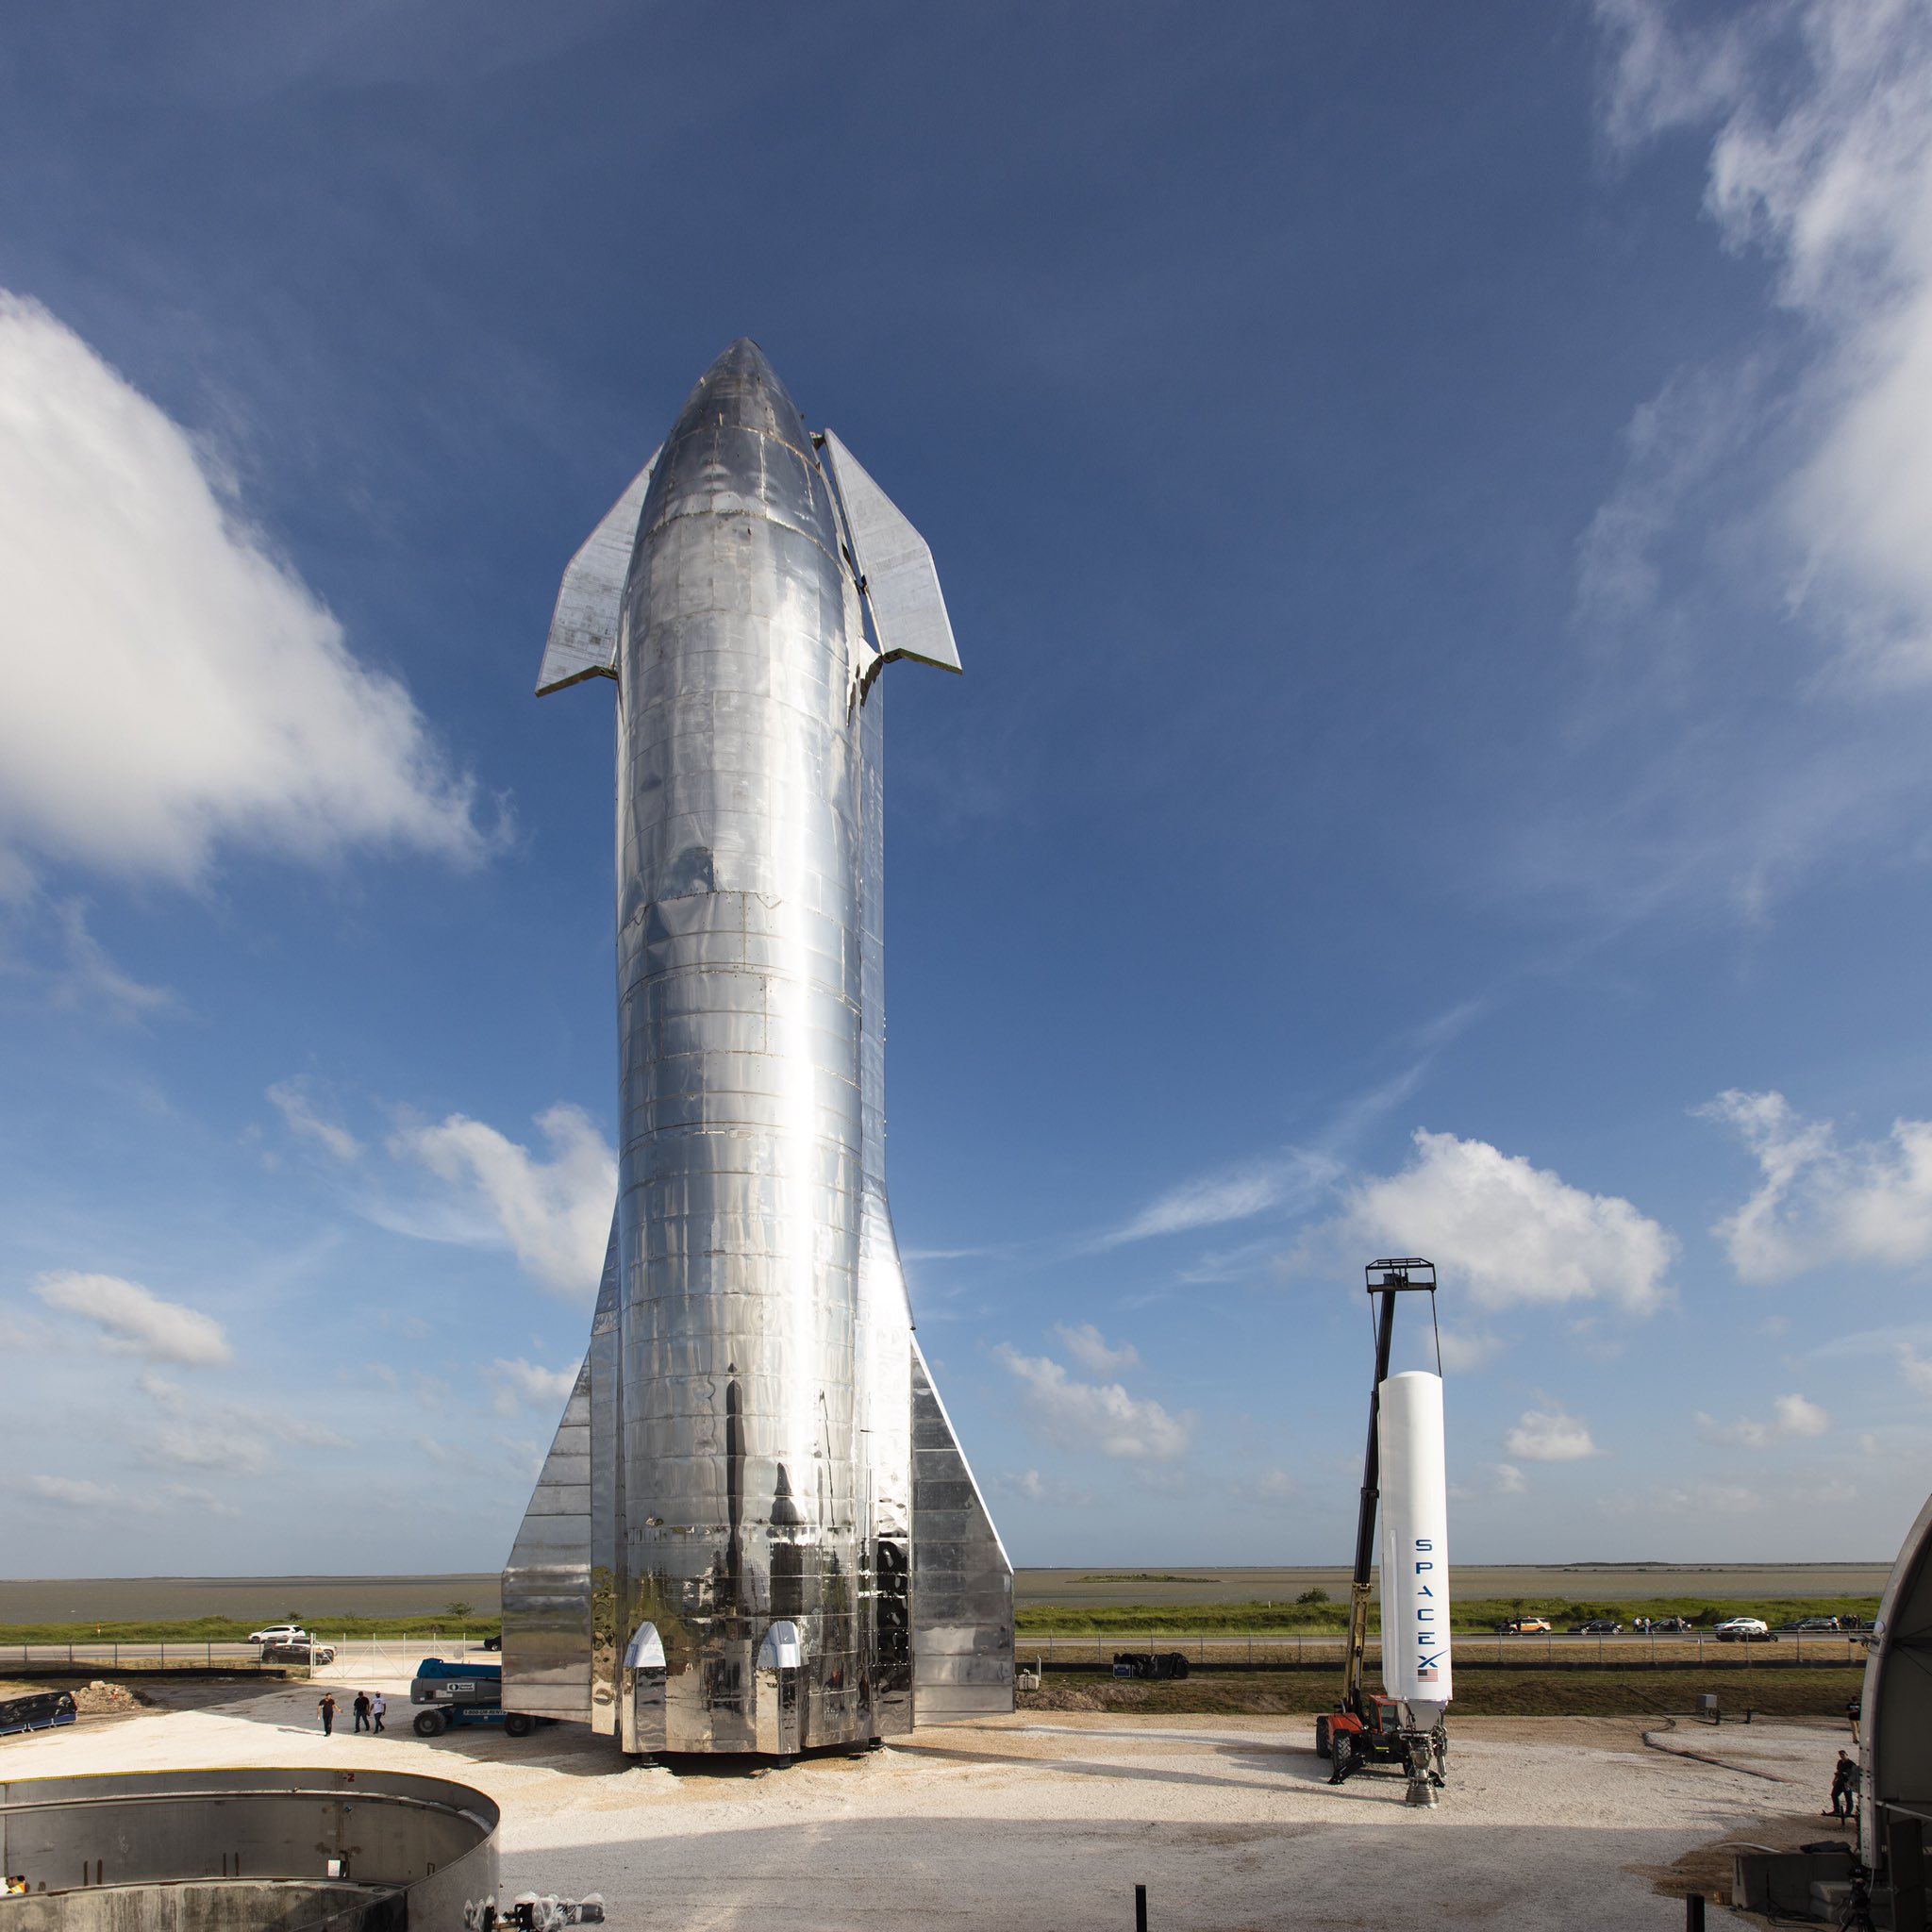 SpaceX Stainless Steel Starship Prototype